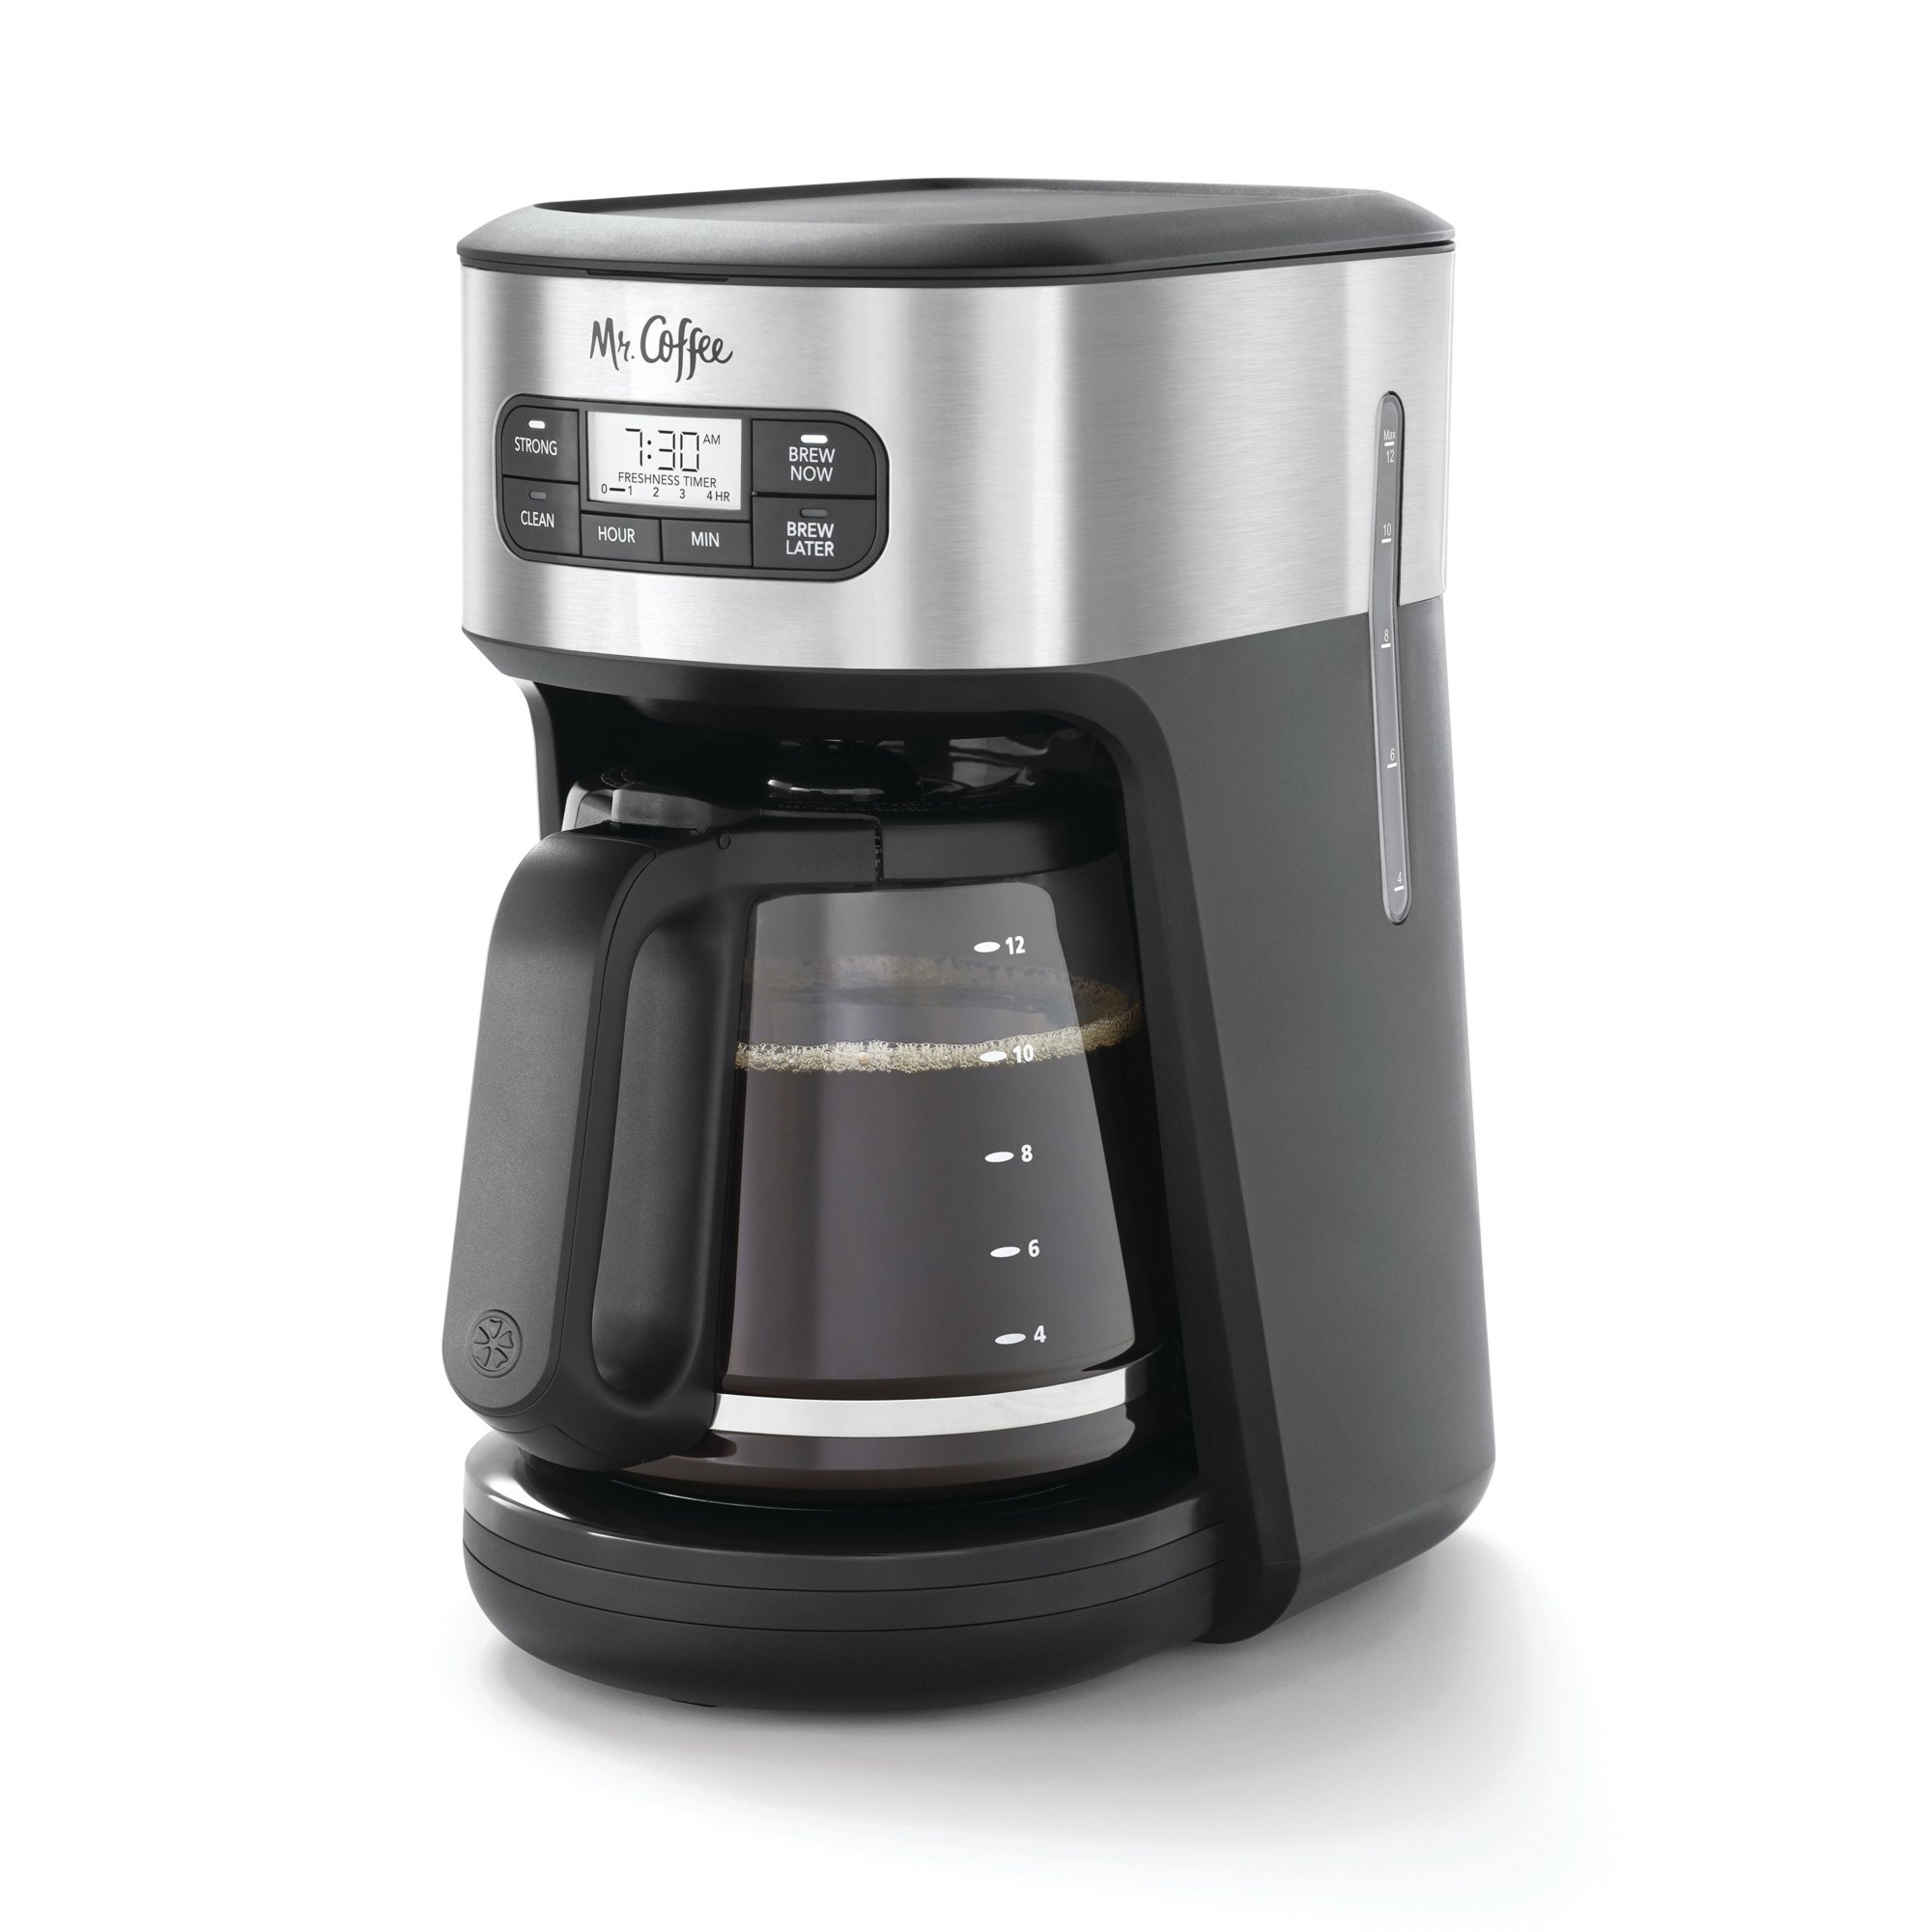 Mr. Coffee 12-Cup Programmable Coffee Maker - Pick Your Plum